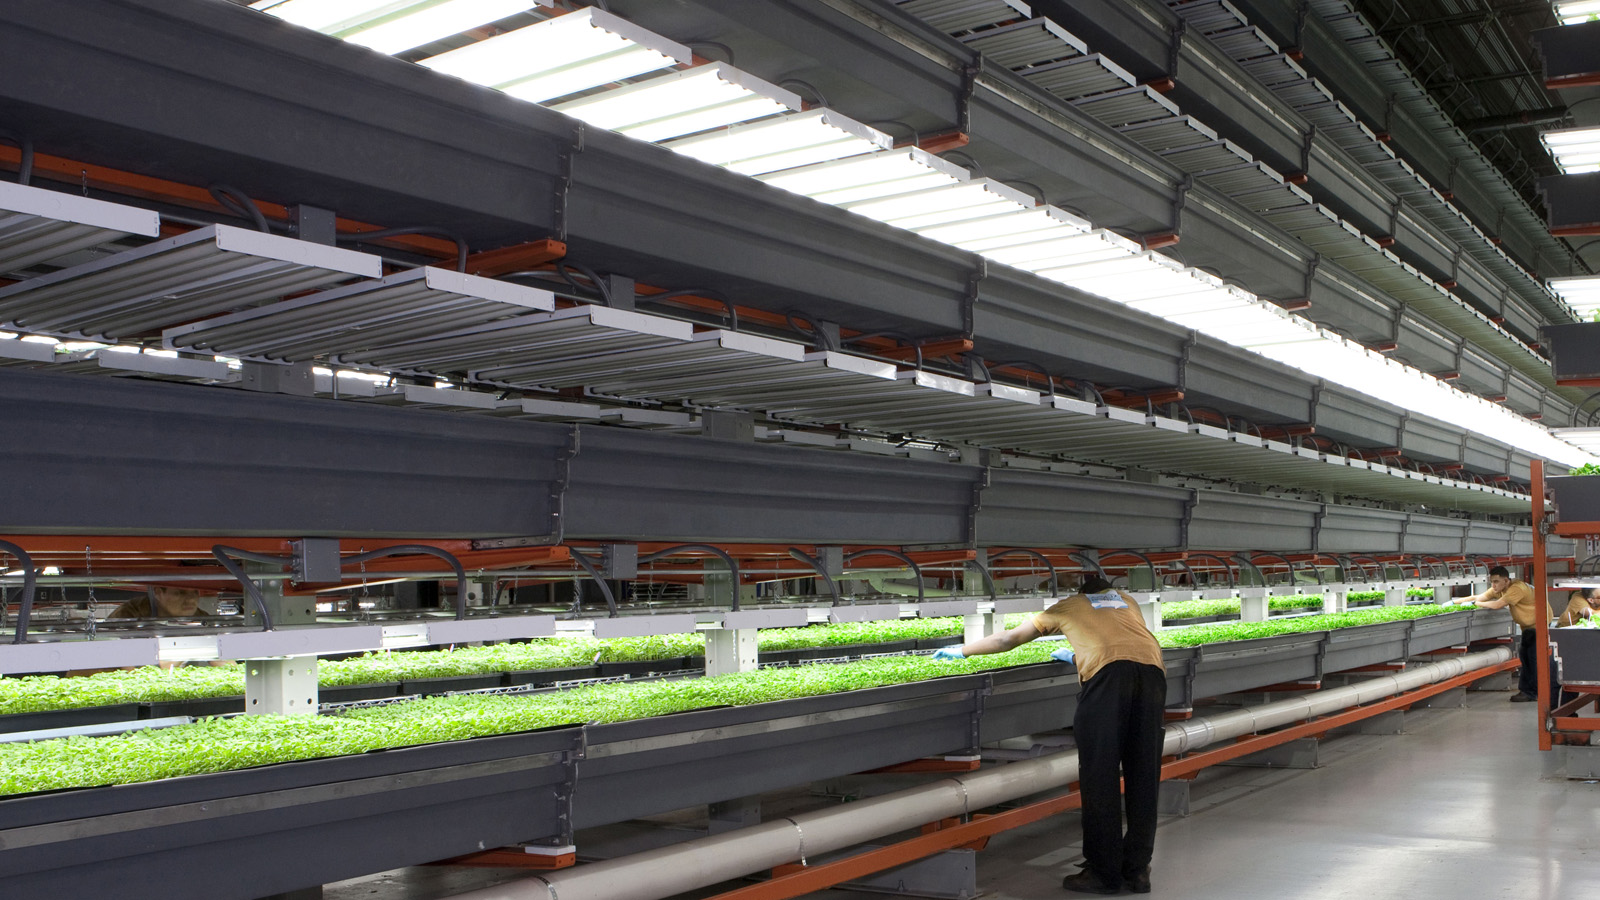 This Is The Future: 14 High-Tech Farms Where Veggies Grow Indoors